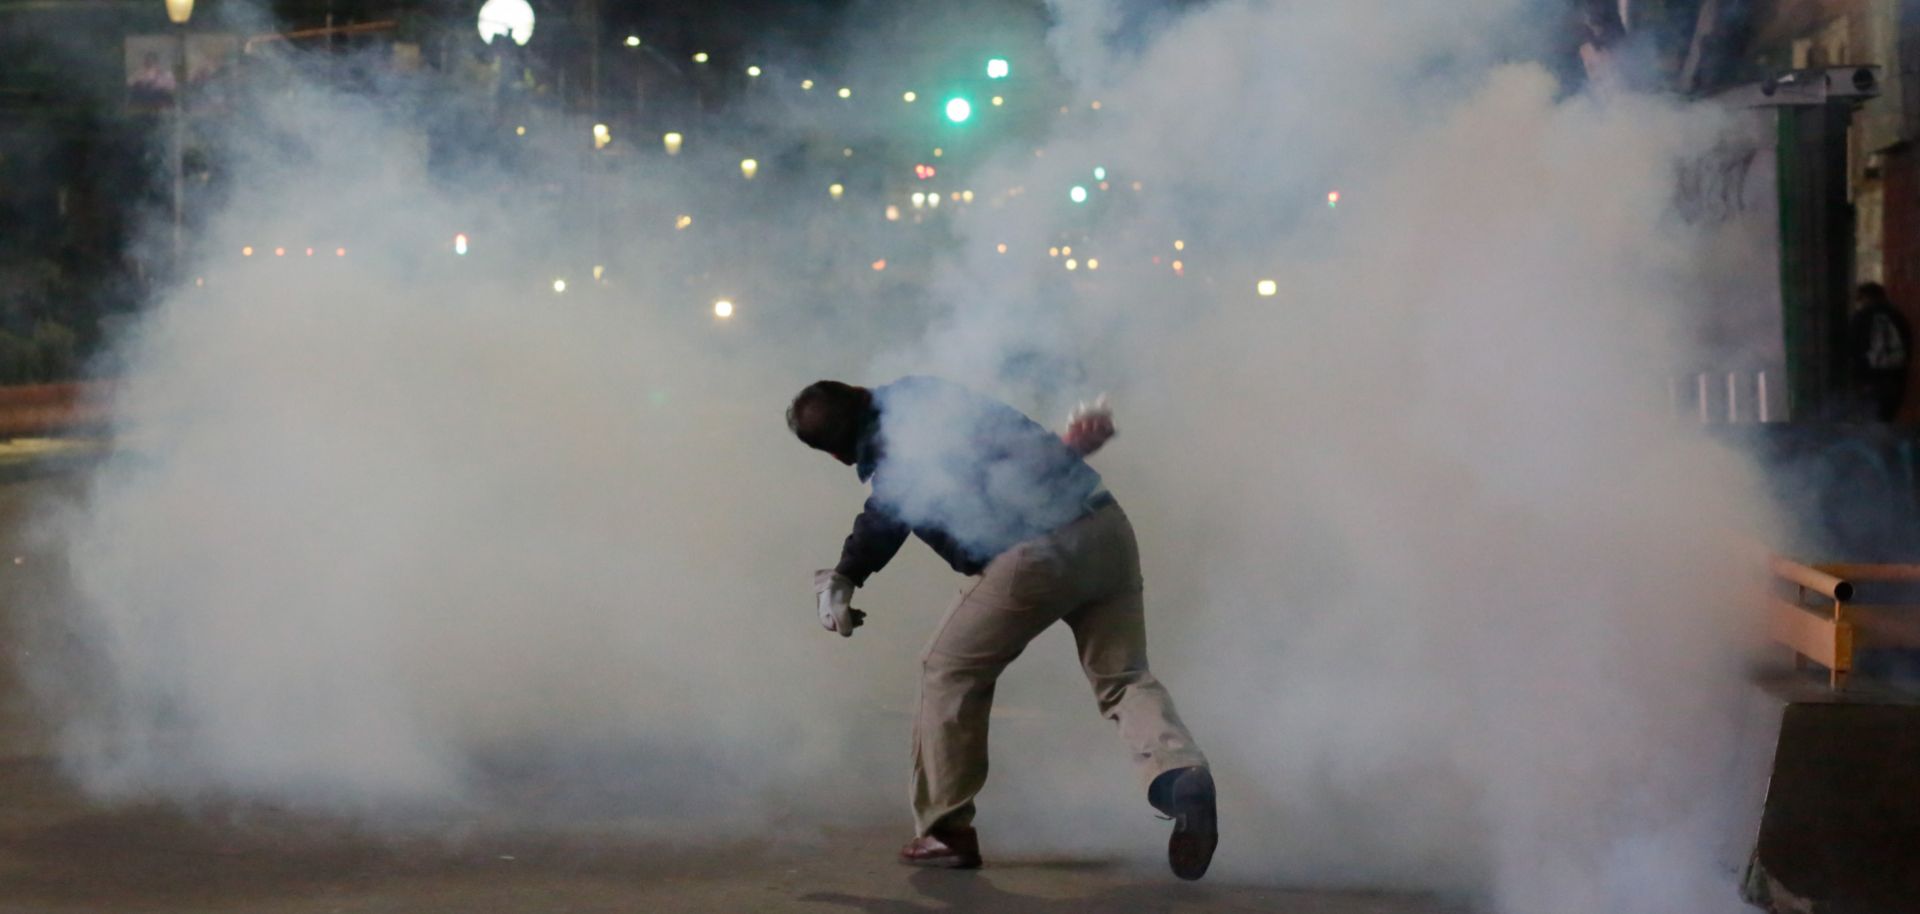 A demonstrator throws a tear gas canister during a demonstration against Bolivian President Evo Morales on Nov. 5, 2019, in La Paz, Bolivia.